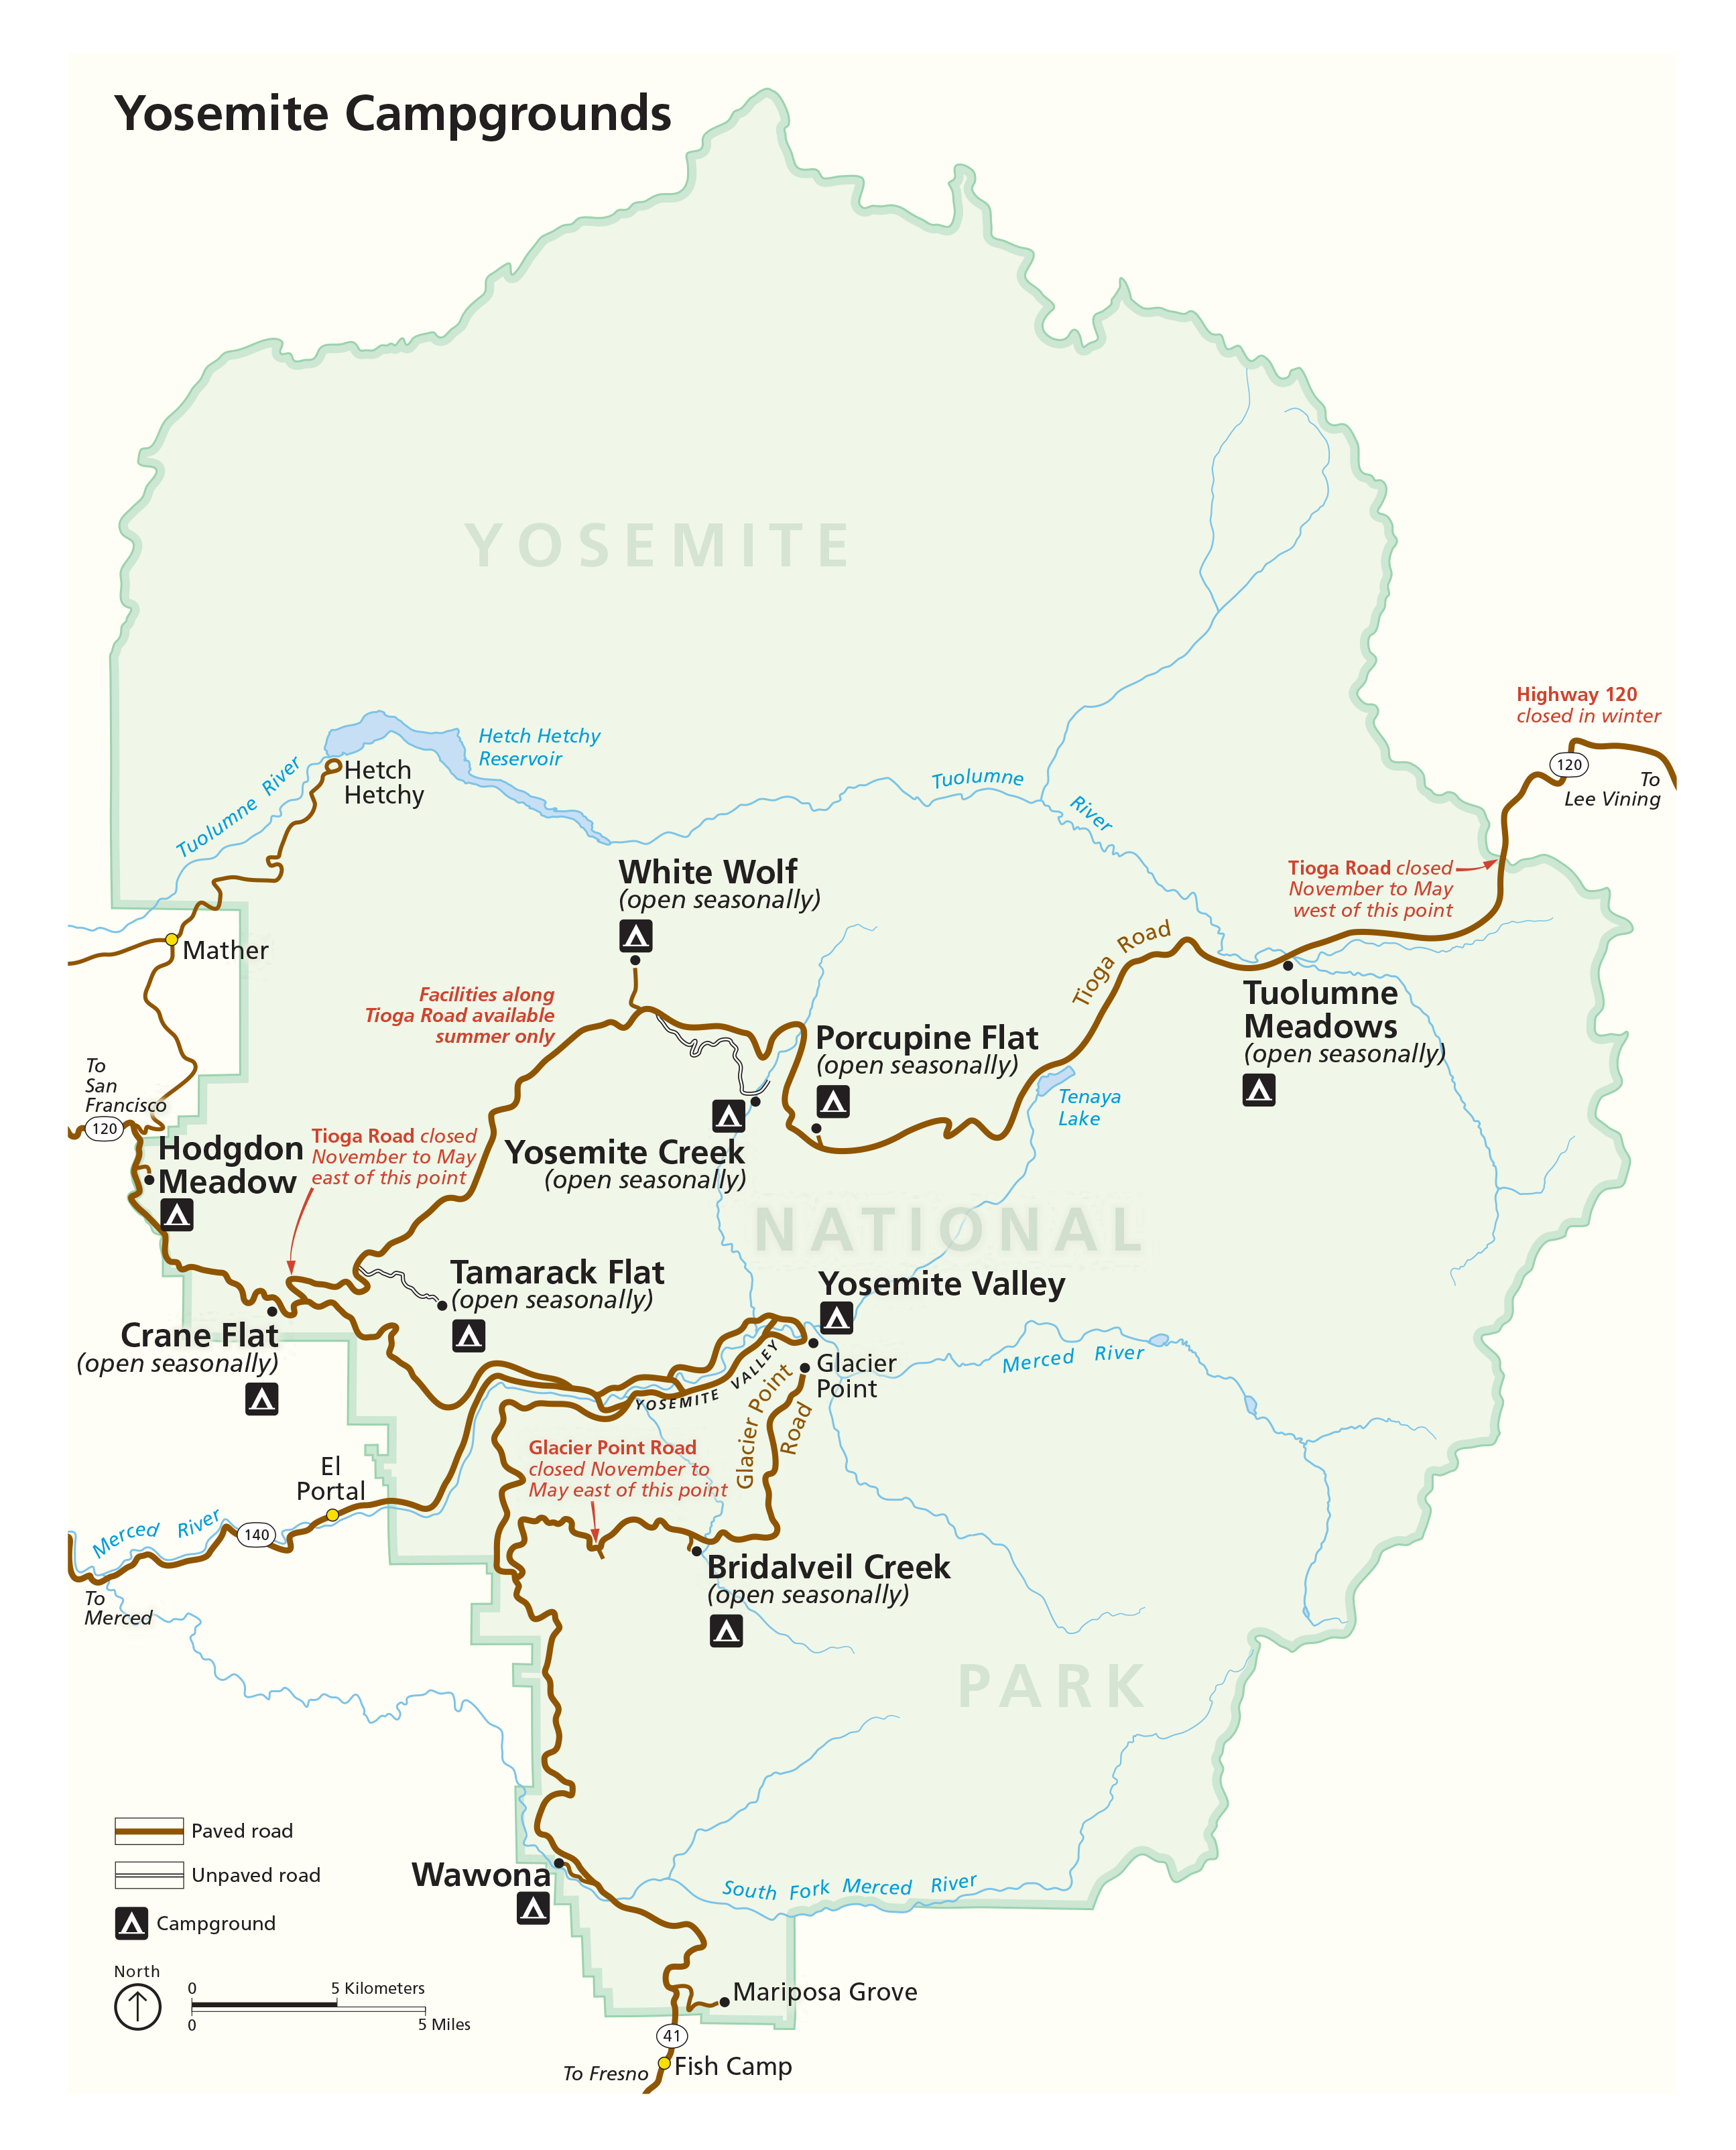 Map of Yosemite National Park, about 95 percent of which is wilderness. Fly to Madera and enter via Highway 41 and the South Entrance. Or, fly to Mammoth and enter via Highway 120 and Tioga Pass (longer, though more scenic drive). The vast majority of visitors congregate in the relatively small Yosemite Valley, but if you want solitude, you can get it by backpacking the backcountry (pick up permits at the Visitor’s Center). A must-do is to drive up to Glacier Point. The Glacier Point Road is accessed via Highway 41, south of Yosemite Valley. Map courtesy NPS.